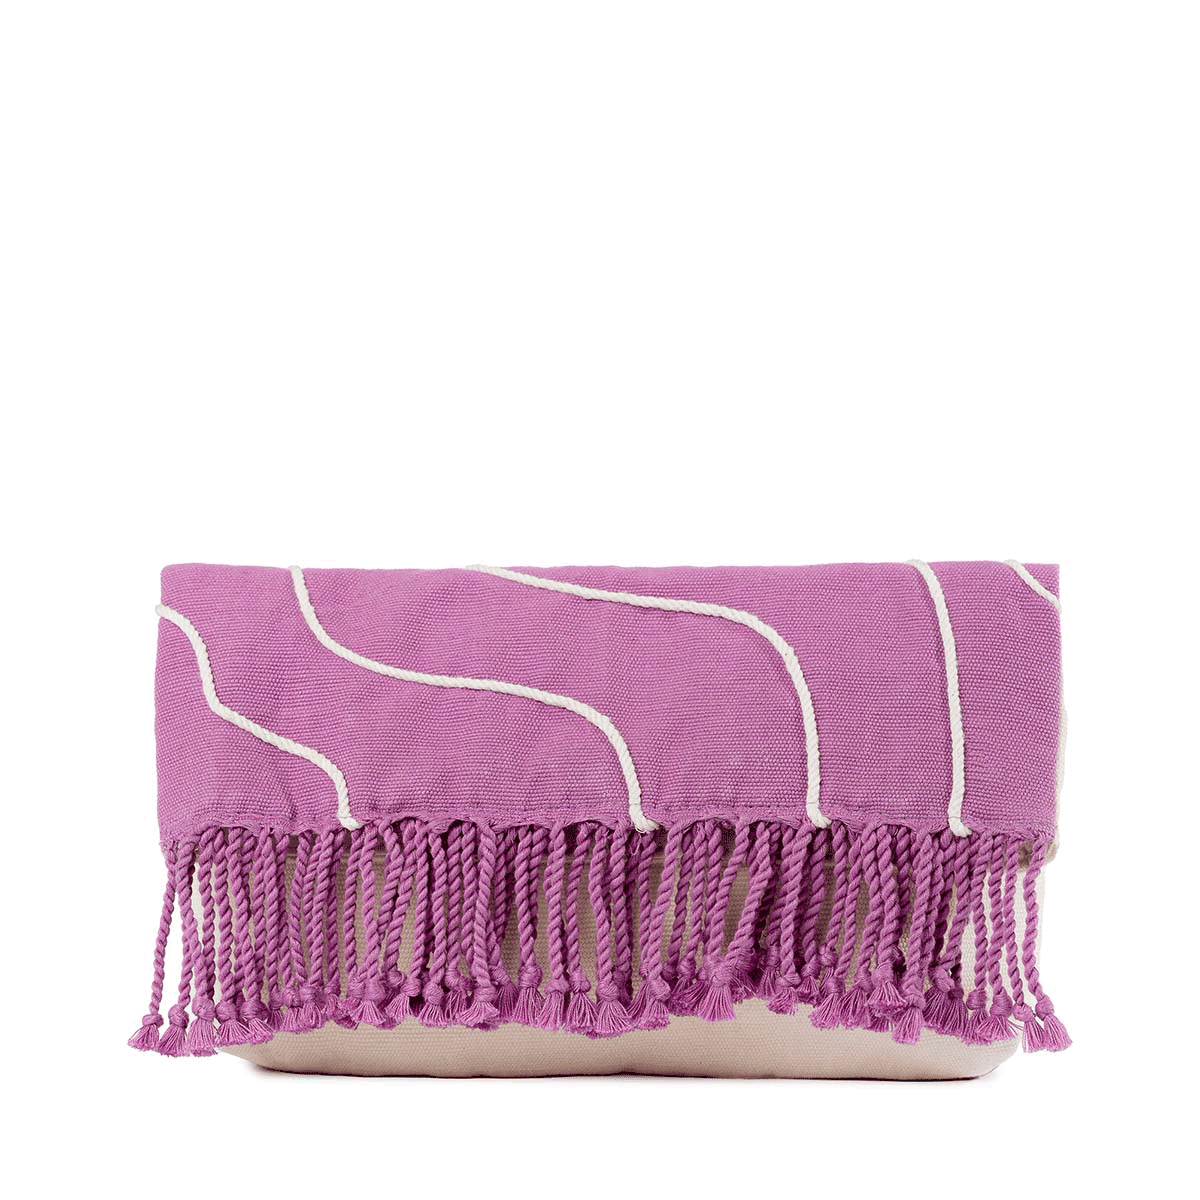 A GIF of the front and back of the hand woven artisan Margarita Clutch in Cosmic Waves.